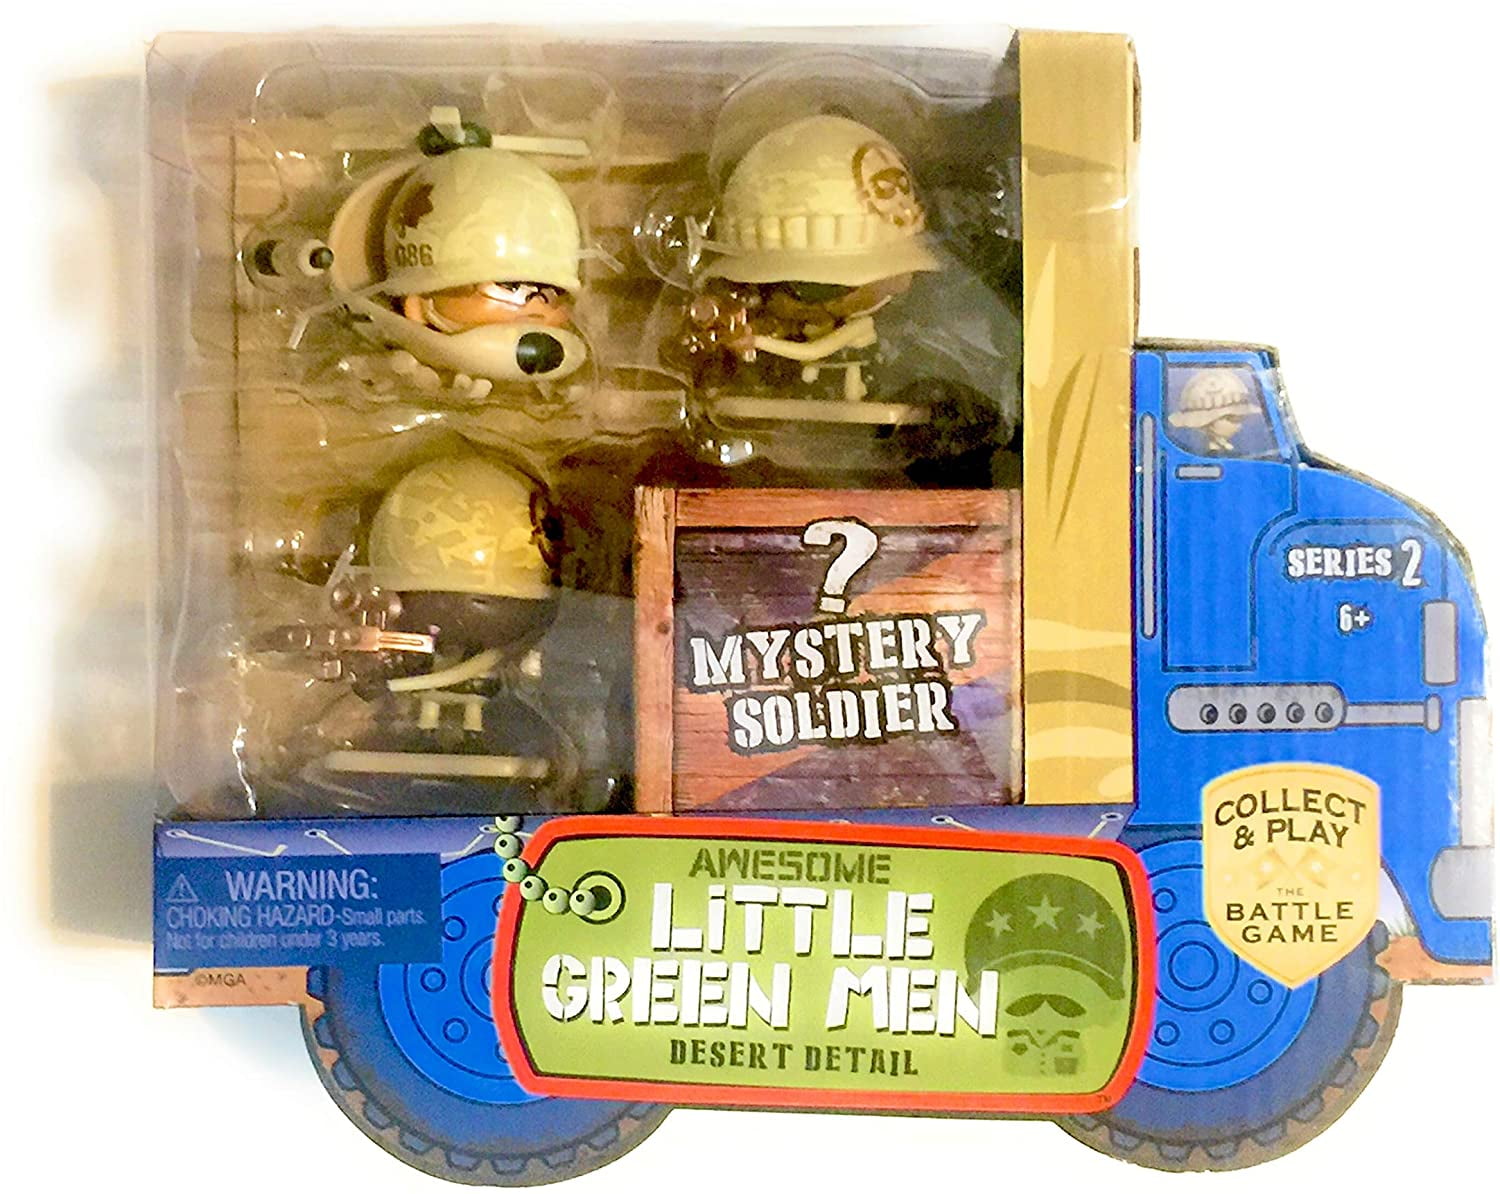 Details about   Awesome Little Green Men Battle Pack Series 2-8 Soldiers Zombie Green Figures 